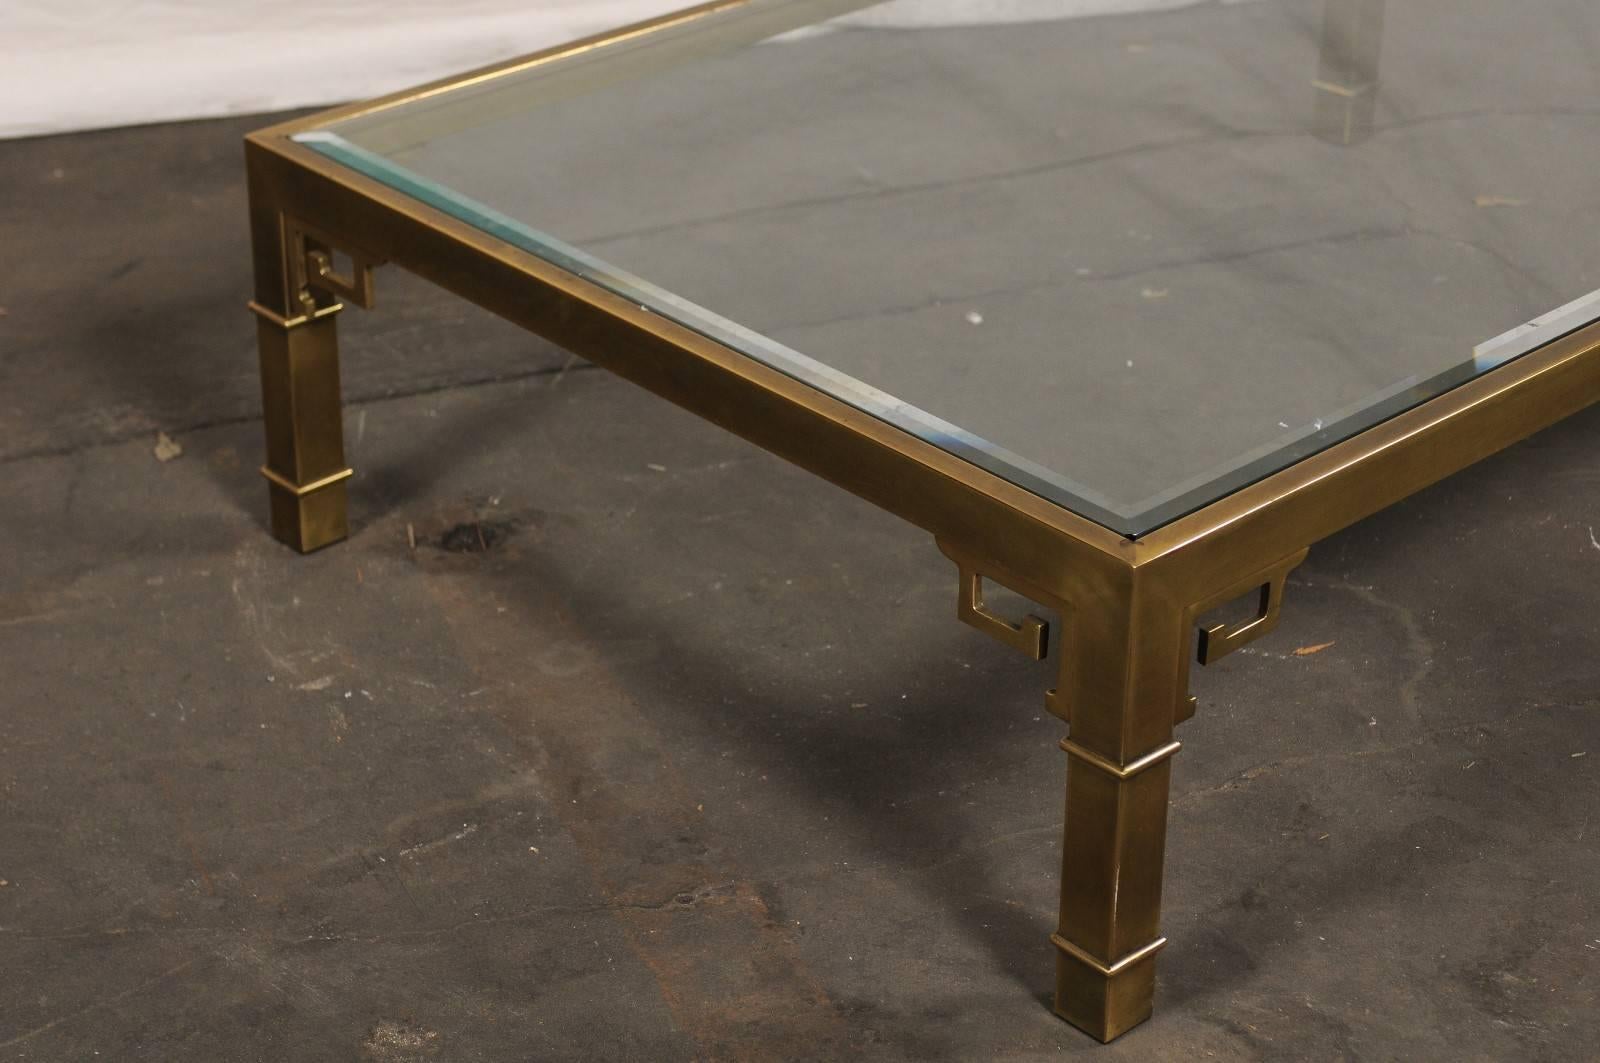 Pair of Mastercraft Chinese Polished Brass Greek Key Coffee Tables,  circa 1970s For Sale 1